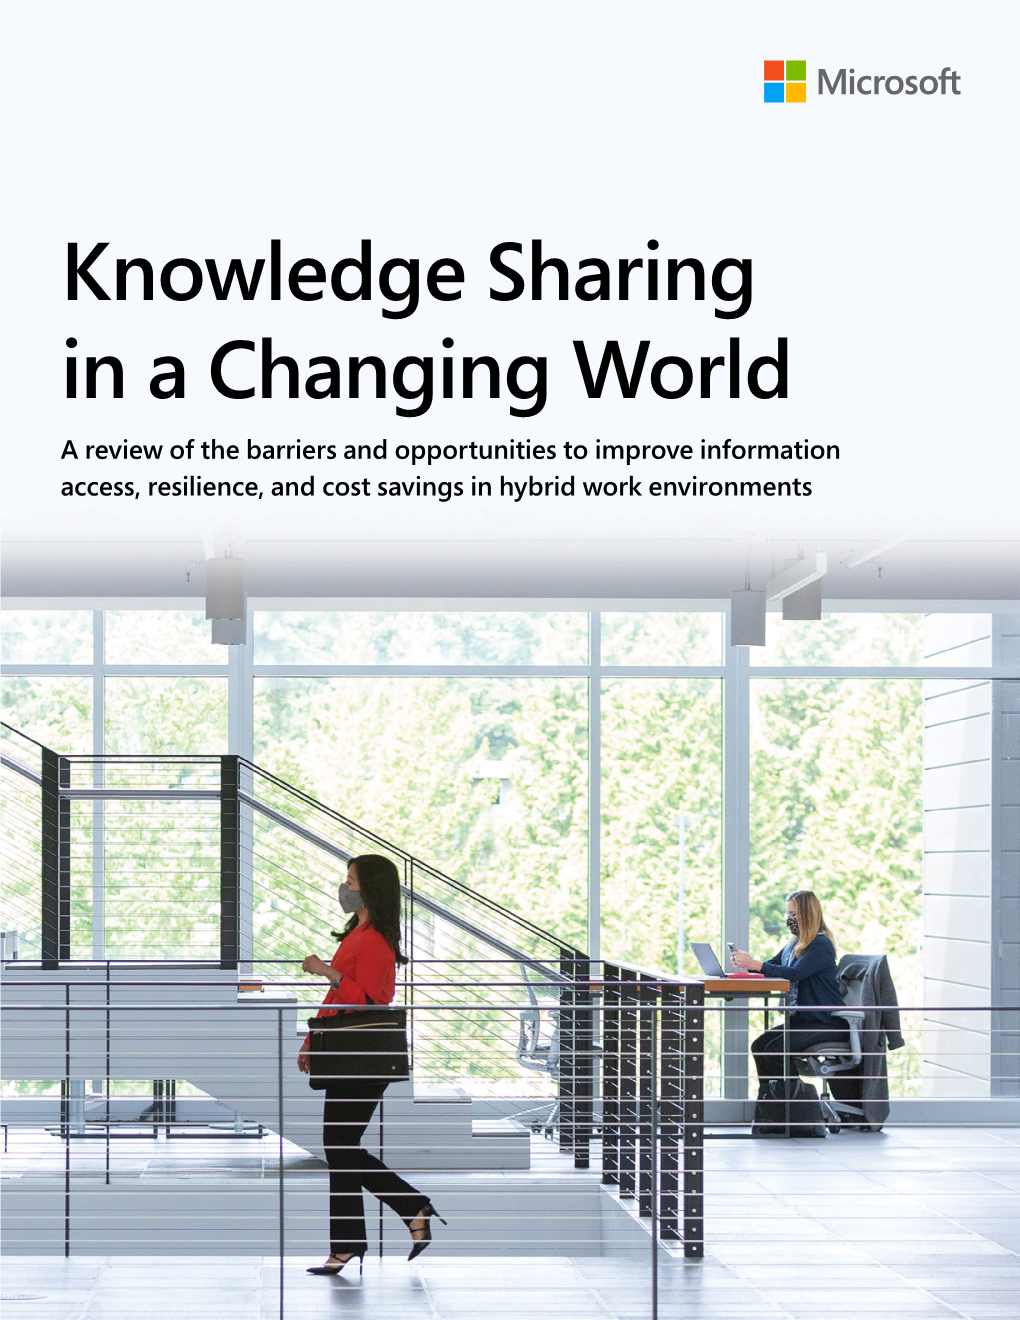 Knowledge Sharing in a Changing World